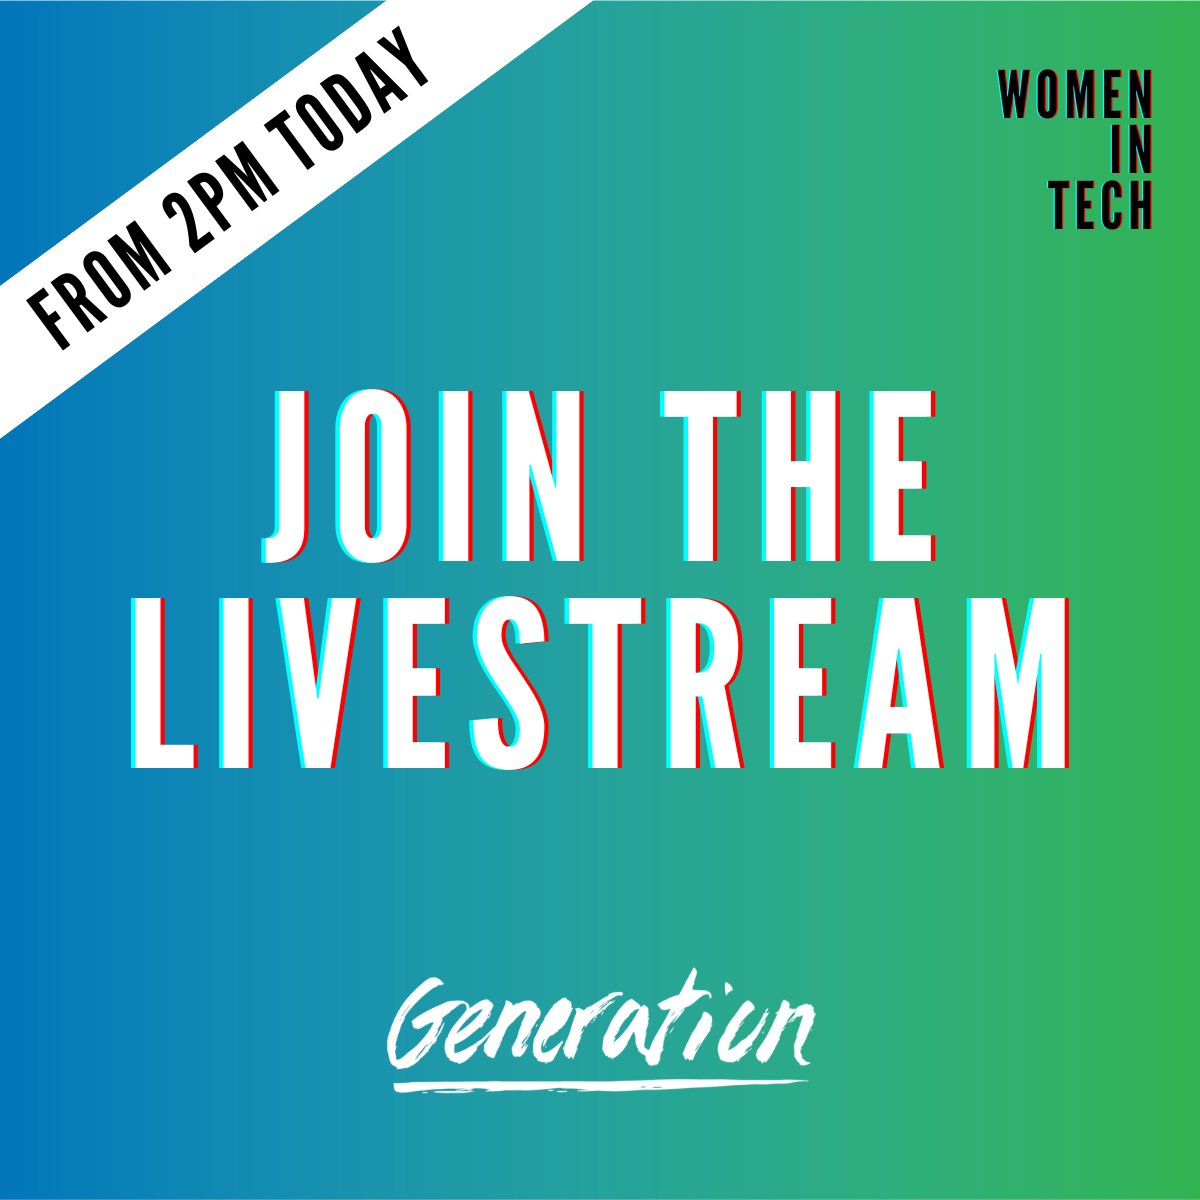 Looking to launch a career in tech? Watch our livestream for the first #WomenInTech event from 2pm today! youtube.com/live/PztK1ycJv…